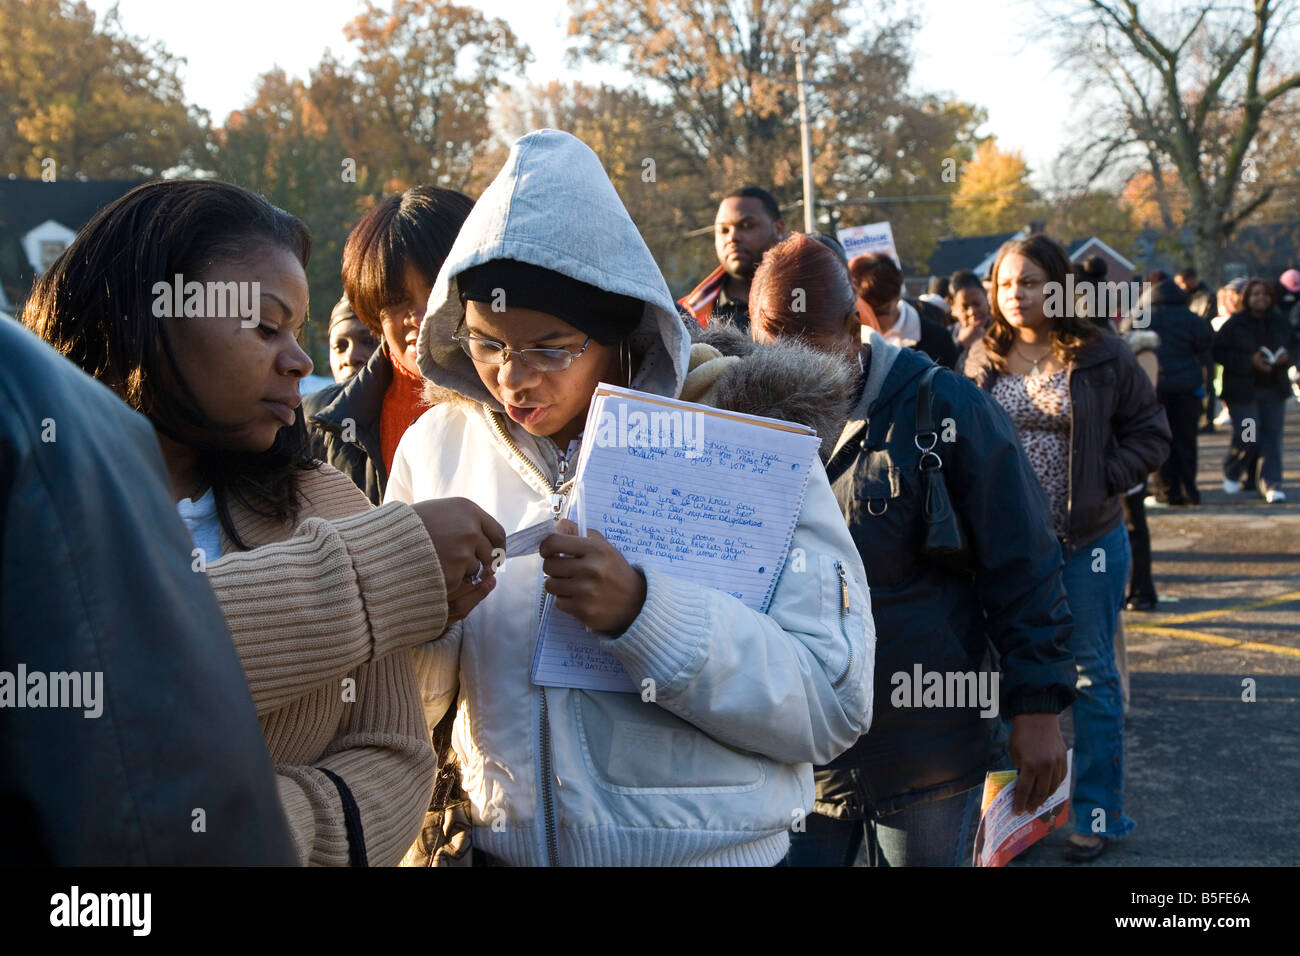 First-time voter waits to cast ballot in 2008 Presidential election Stock Photo